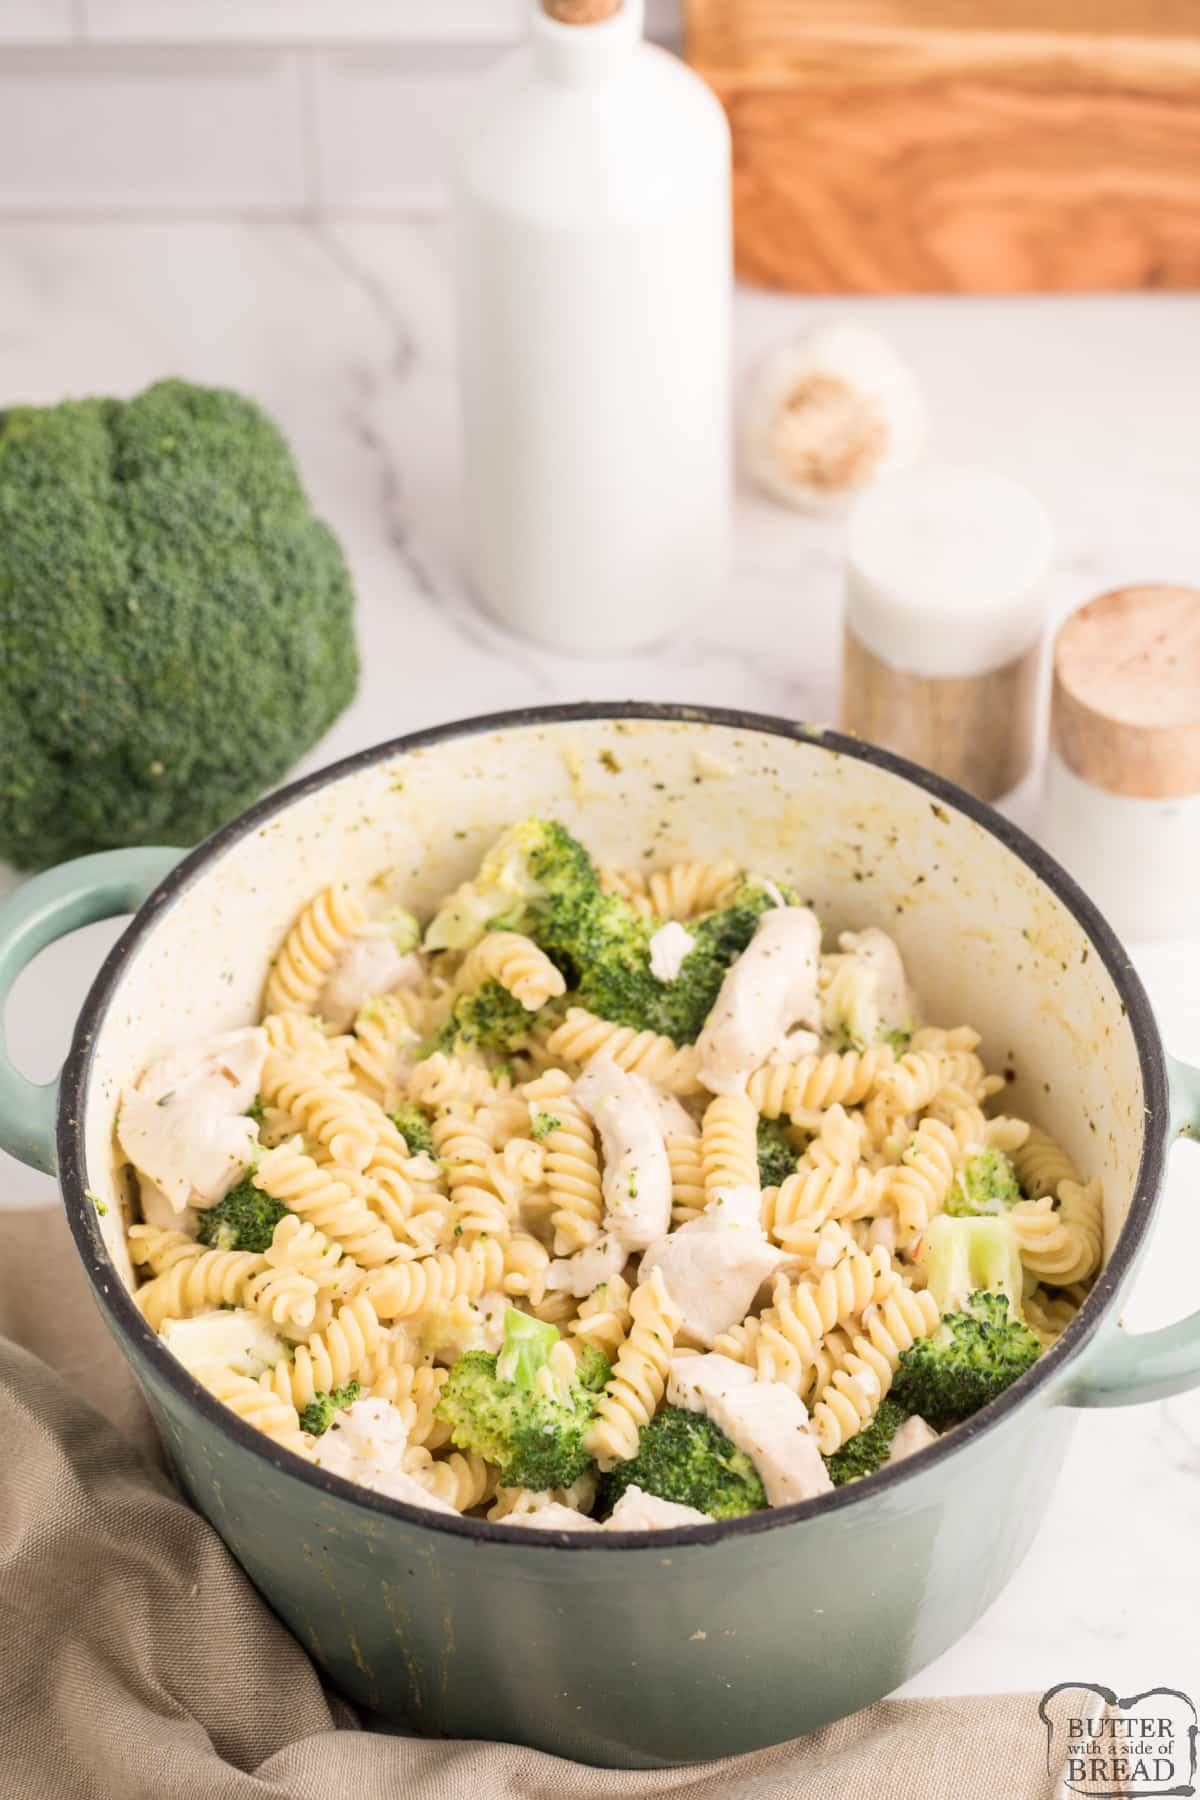 Chicken Broccoli Alfredo is a one pot dinner recipe that the whole family will love! This creamy pasta dish only takes about 30 minutes to make, making this the perfect weeknight dinner recipe. 